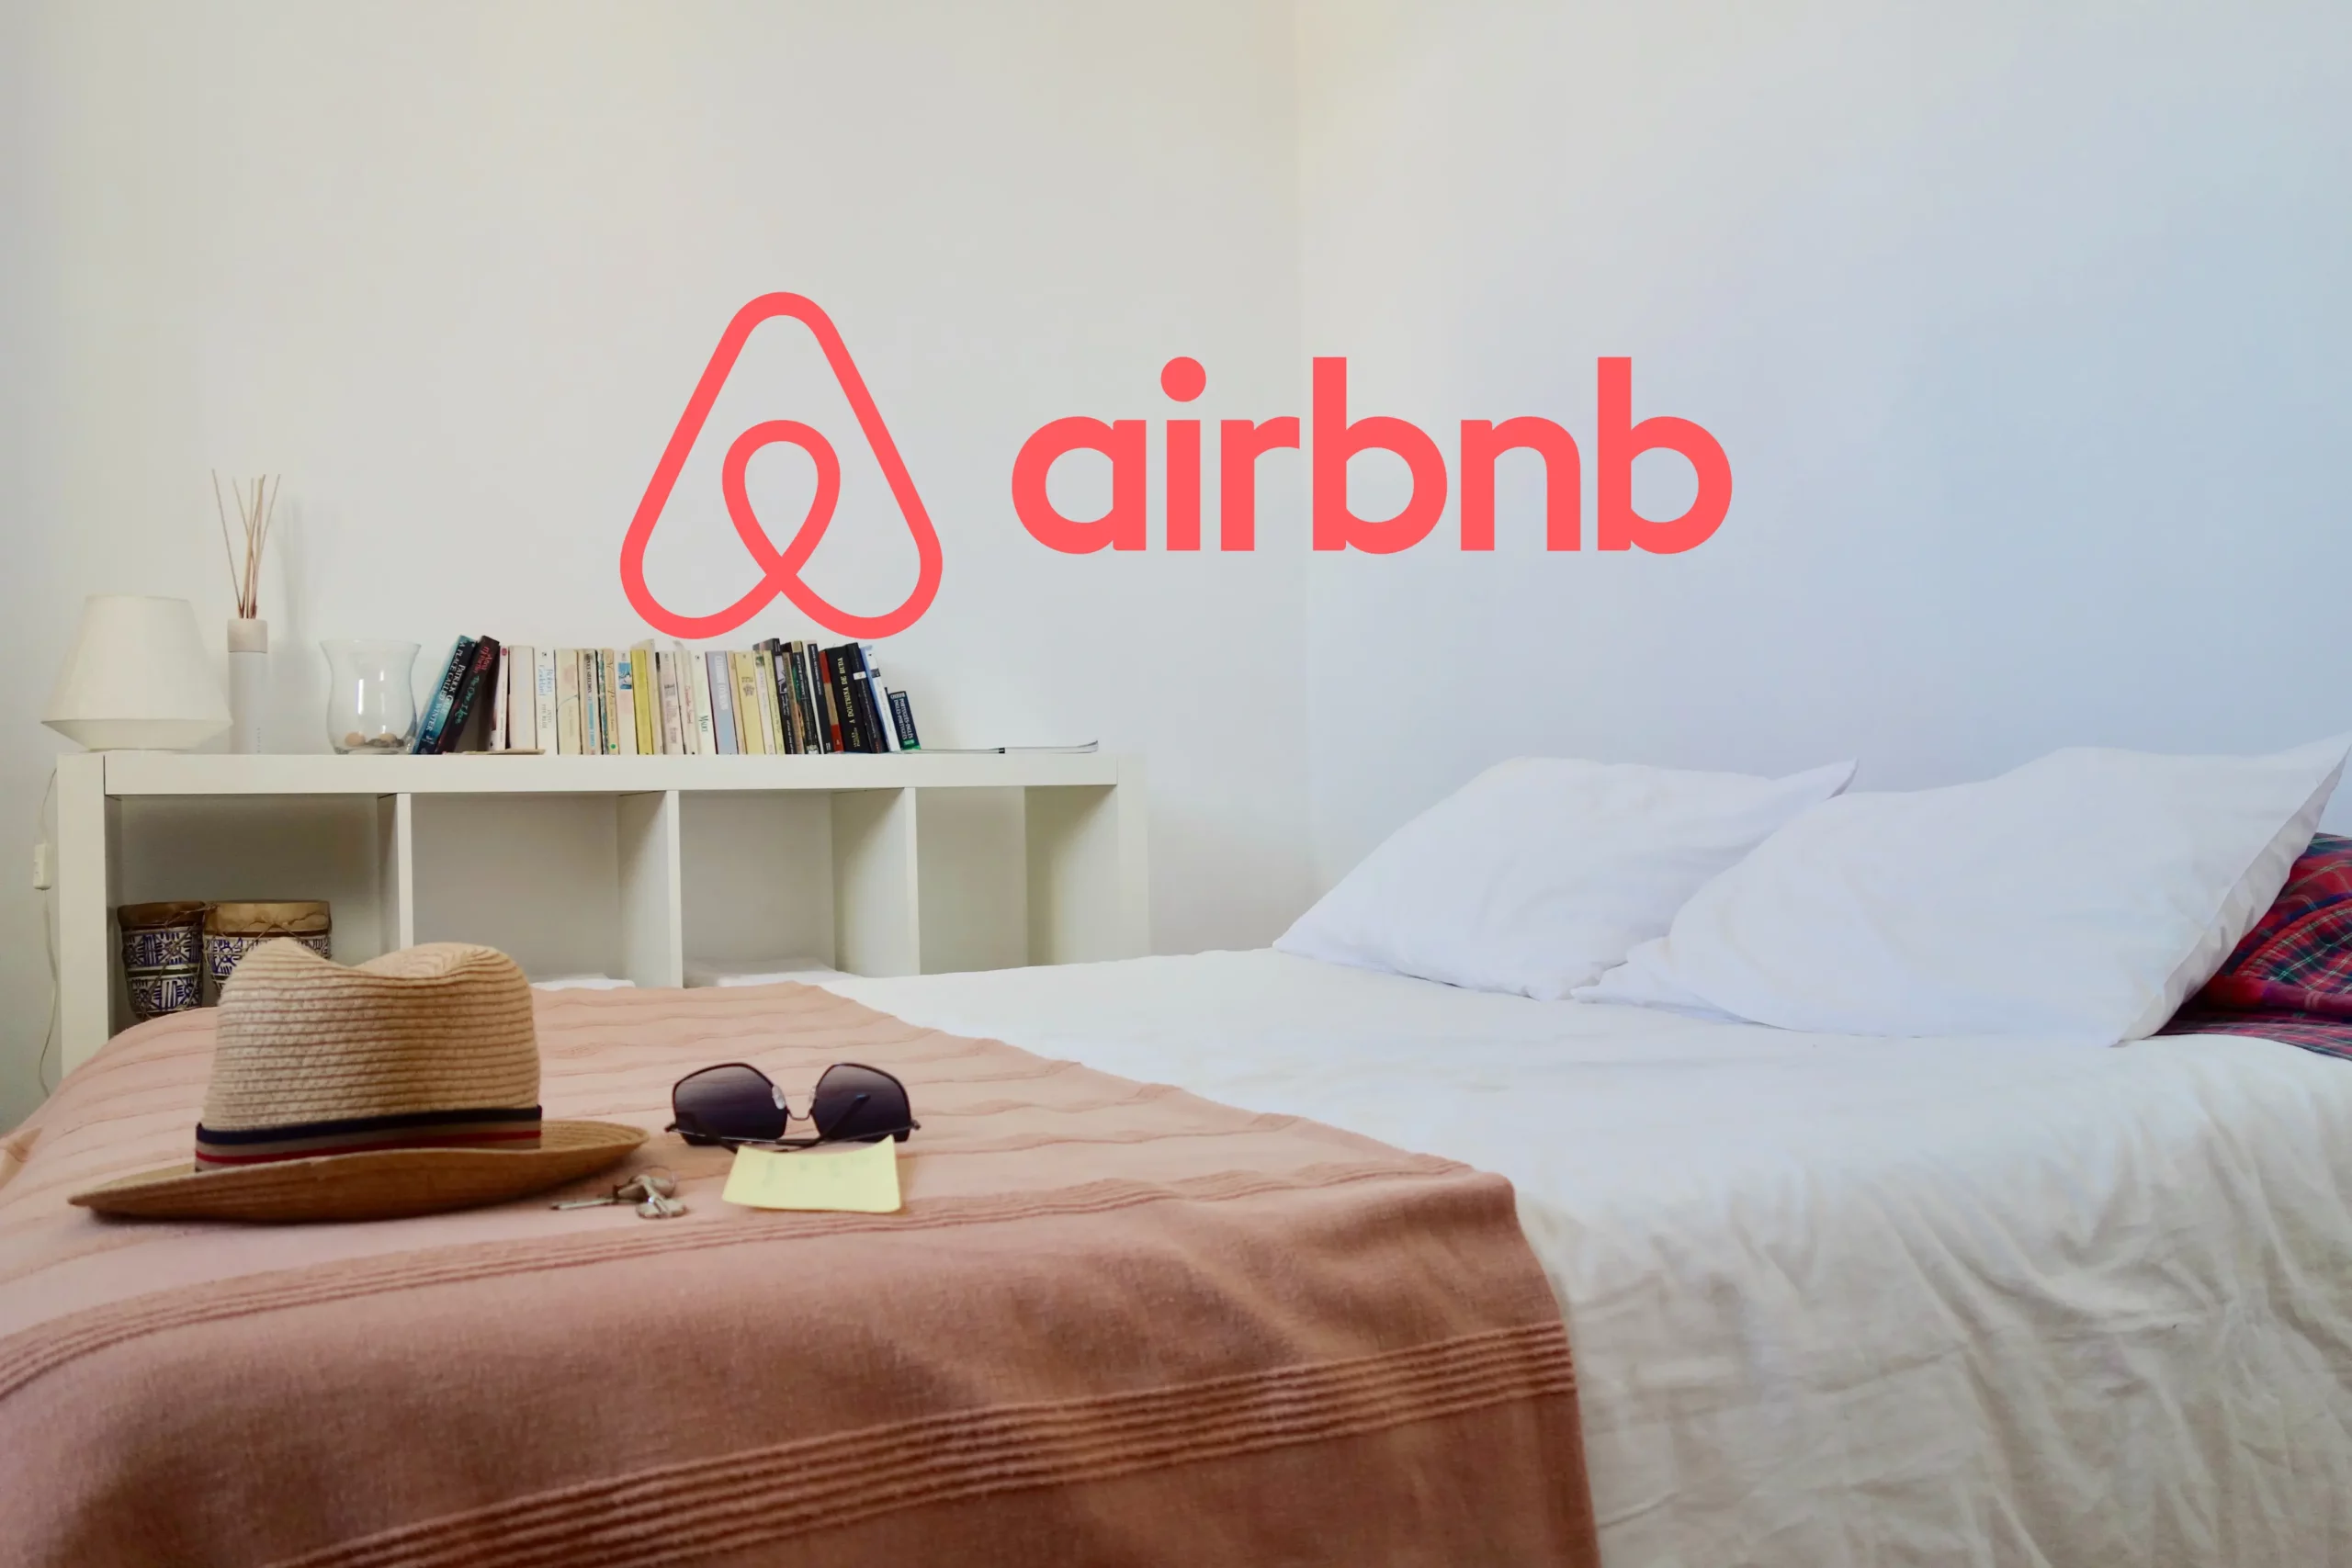 Airbnb Updates Their Security Cameras Policy Globally